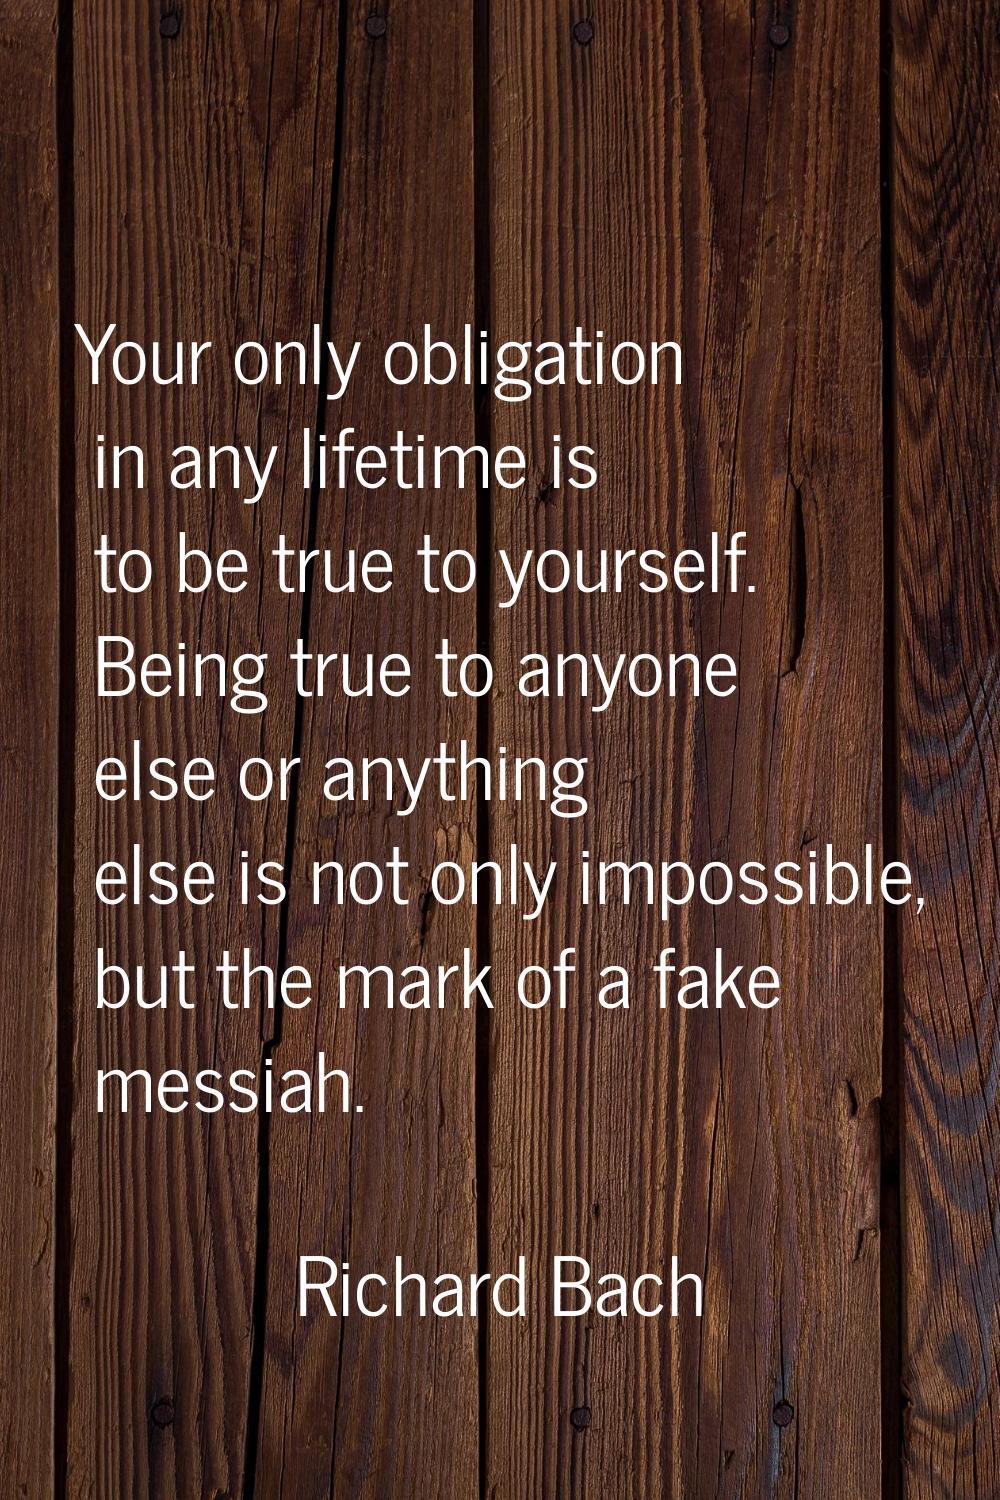 Your only obligation in any lifetime is to be true to yourself. Being true to anyone else or anythi